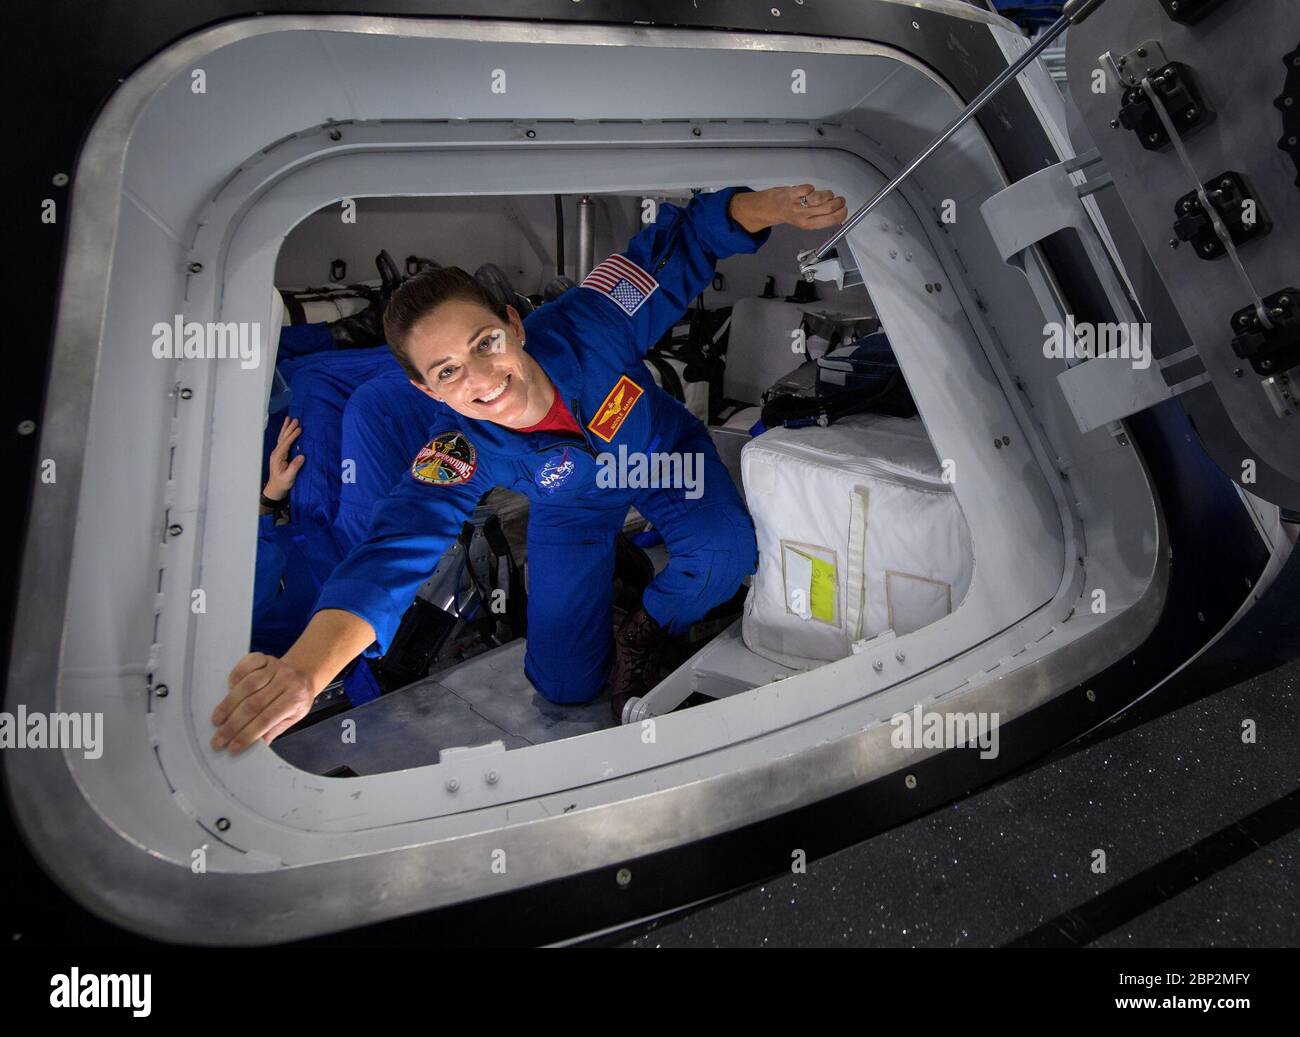 Commercial Crew Program  NASA astronaut Nicole Mann poses for a photograph as she exits the Boeing Mockup Trainer at NASA’s Johnson Space Center in Houston, Texas on Aug. 2, 2018 ahead of the commercial crew flight assignments announcement Aug. 3. Mann, along with NASA astronaut Eric Boe and Boeing astronaut Chris Ferguson were assigned to launch aboard Boeing’s CST-100 Starliner on the company’s Crew Flight Test targeted for mid-2019 in partnership with NASA’s Commercial Crew Program. Stock Photo